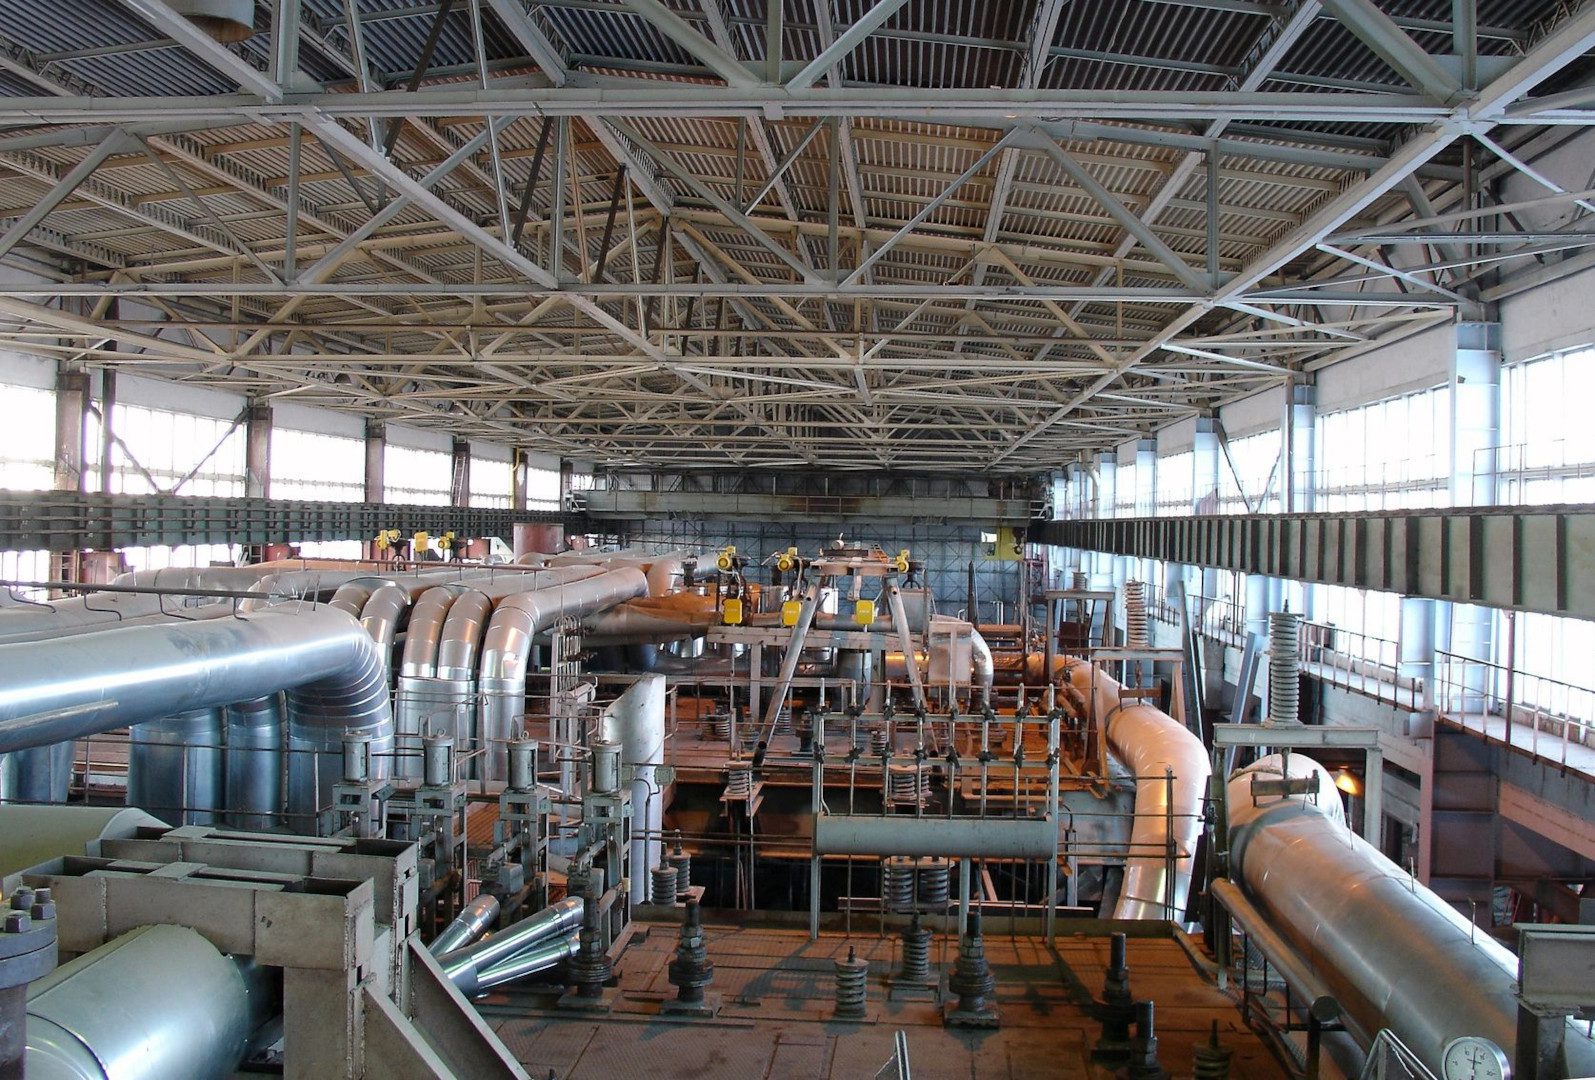 A large warehouse with many pipes and other equipment.